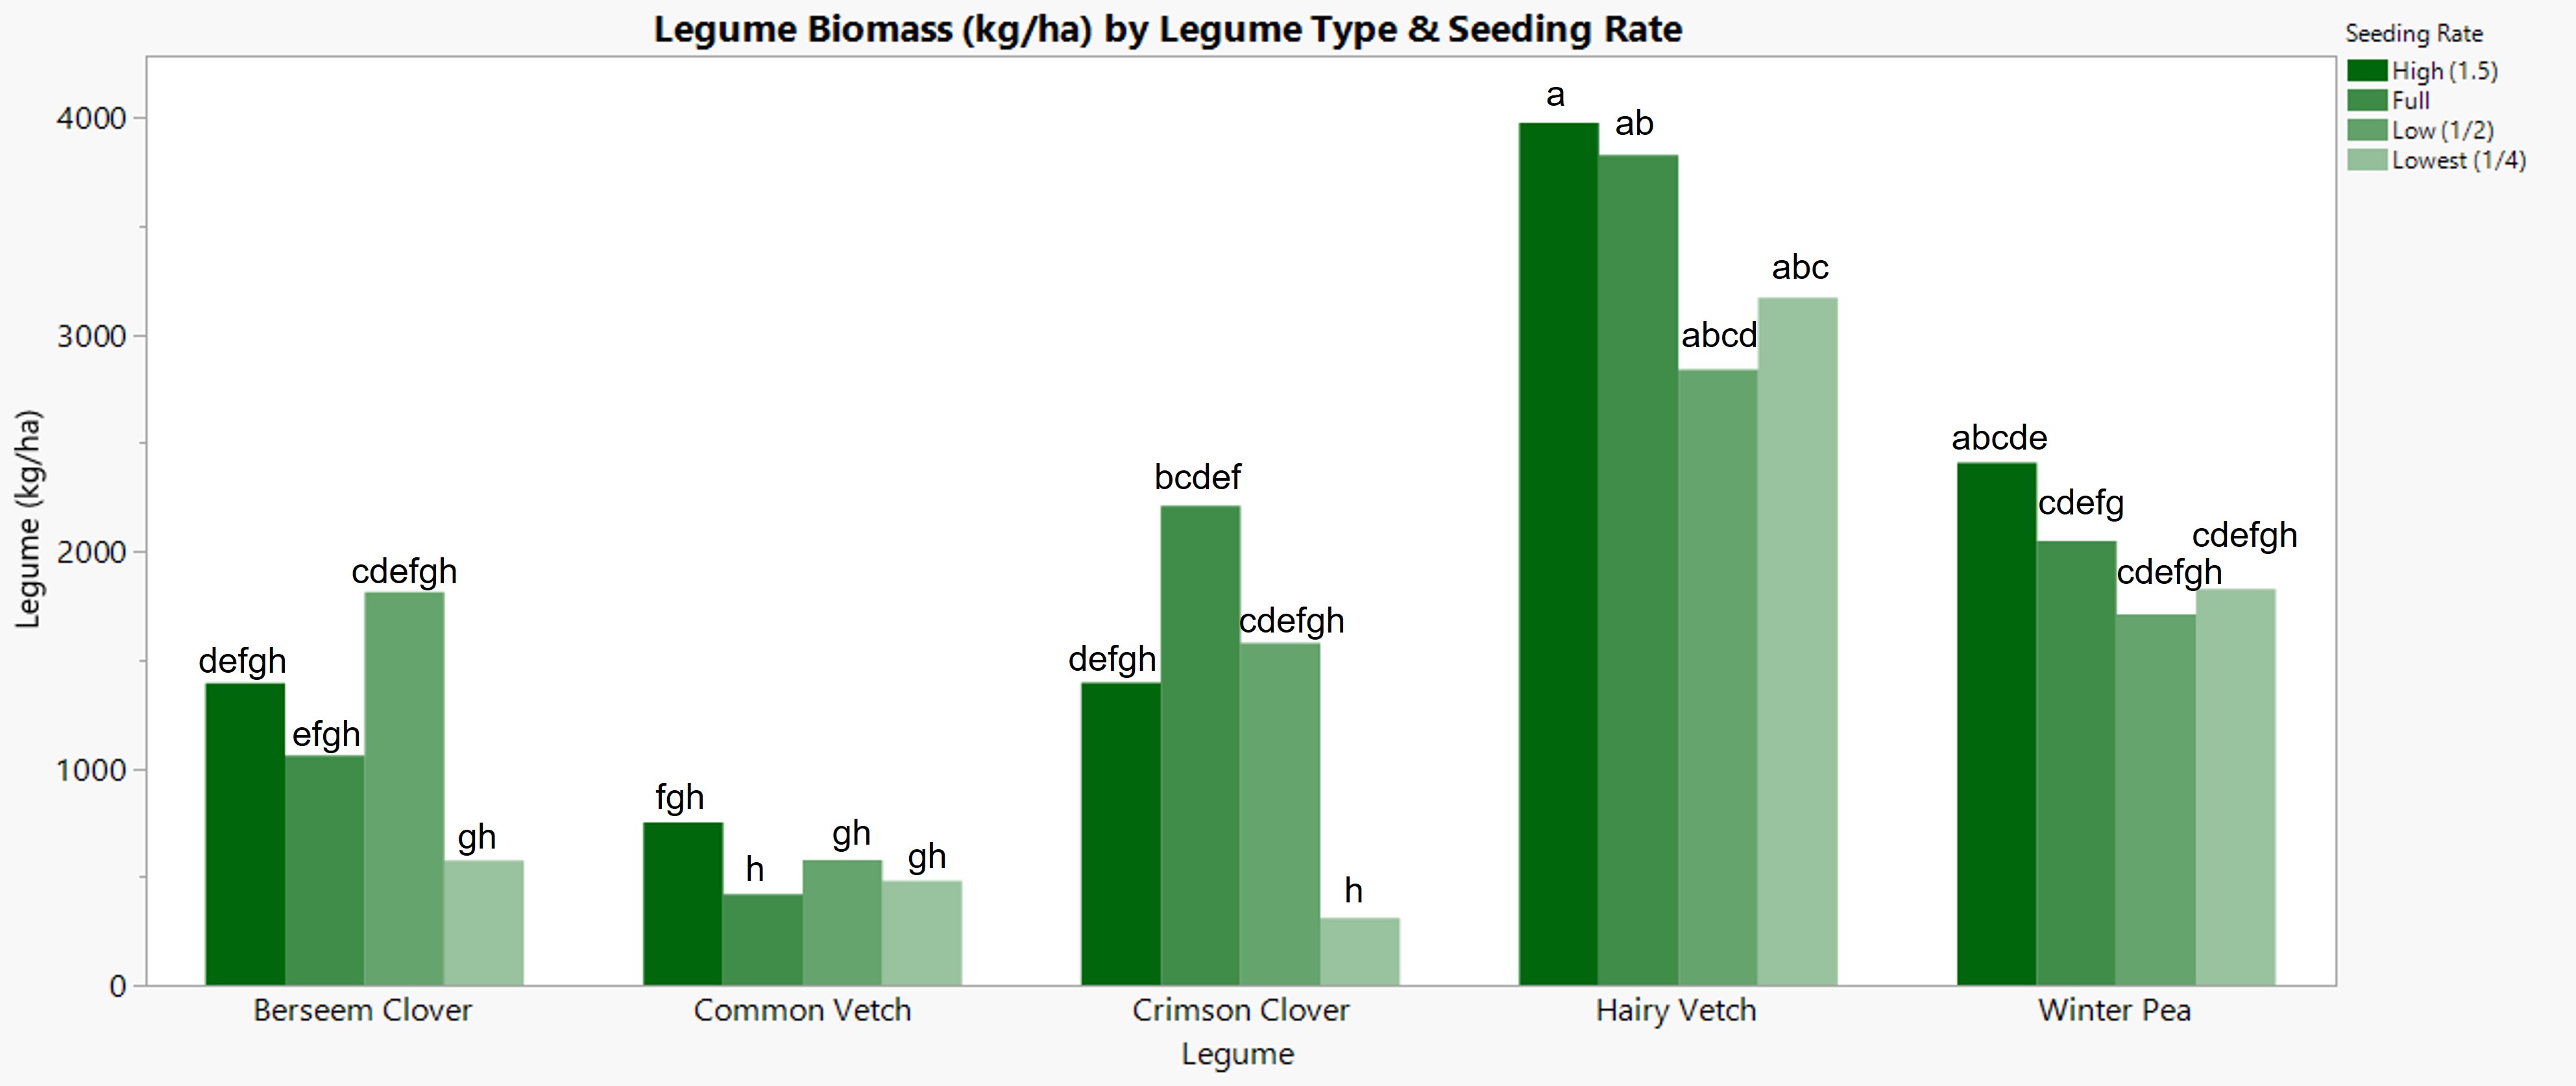 Bar graph showing the amount of legume biomass between cover crop types and seeding rates.  